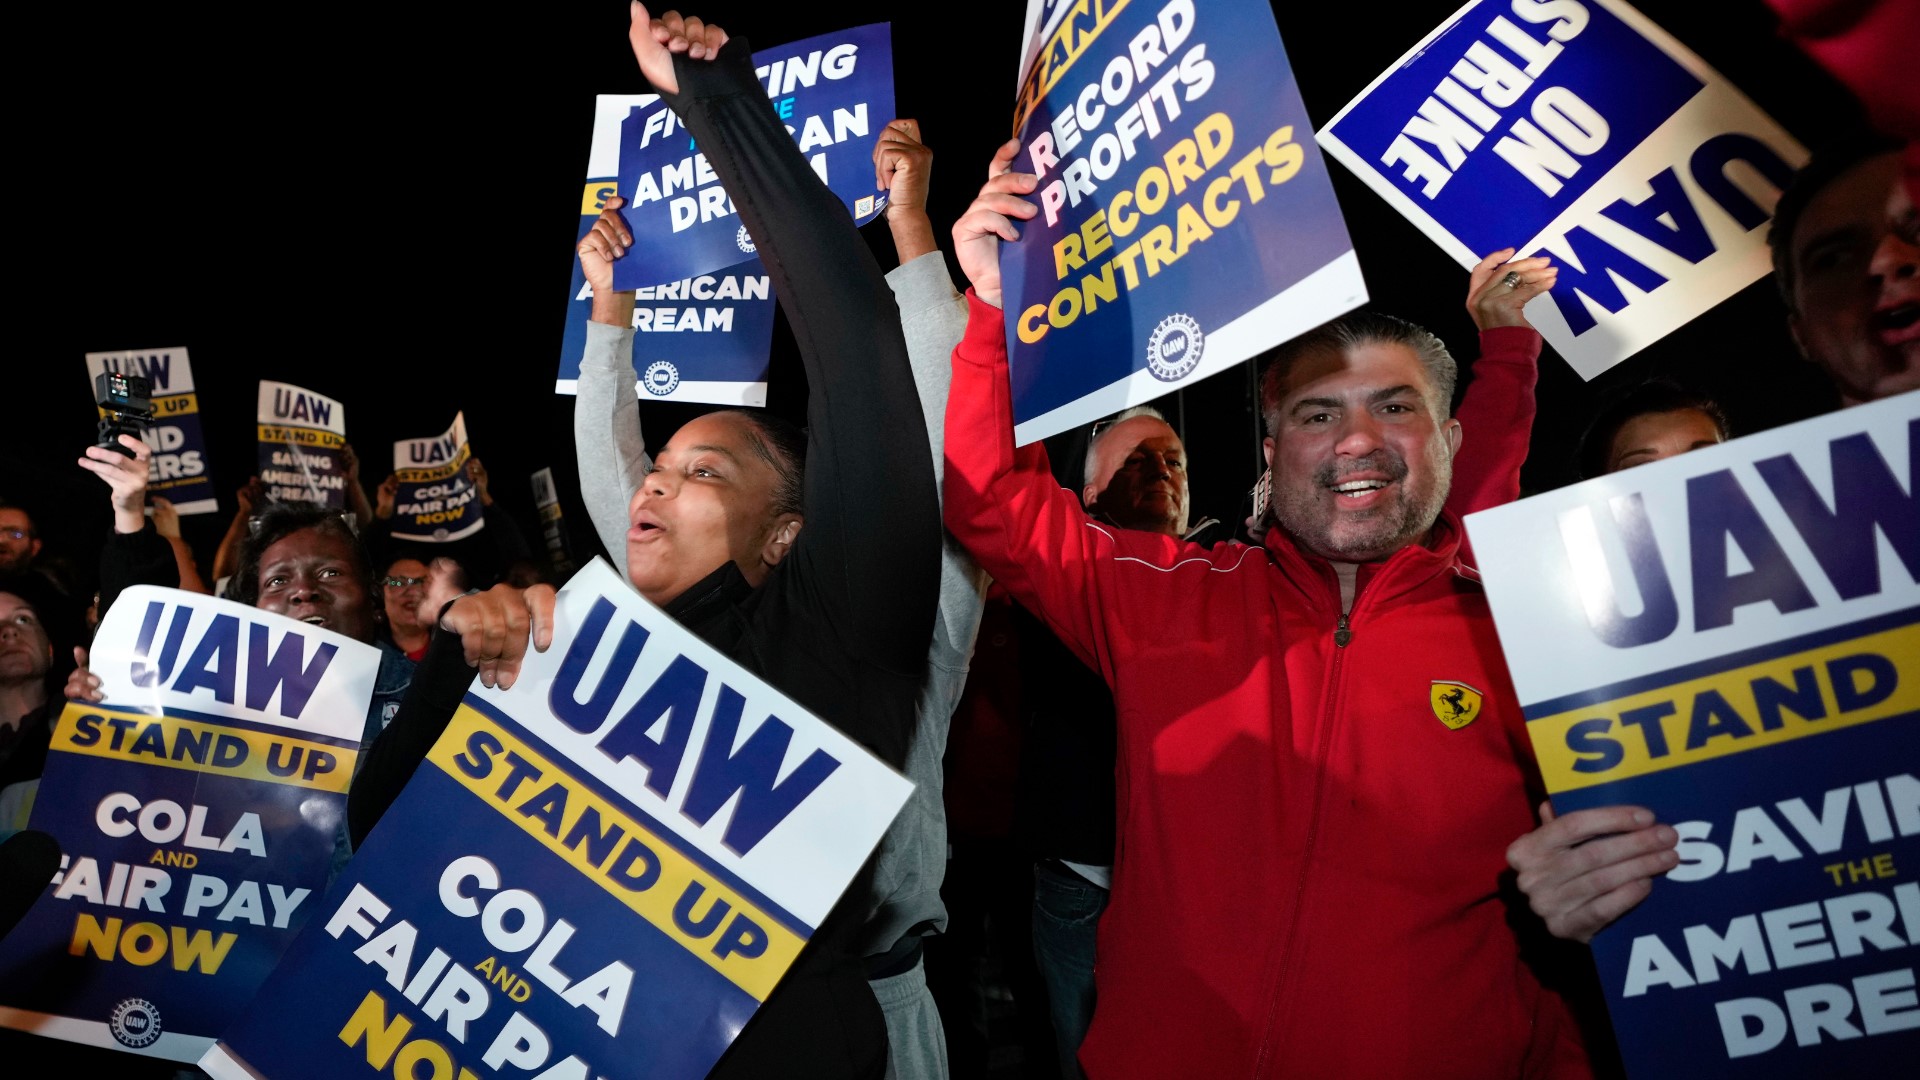 For the first time in UAW's 88-year history, union members walked out on Detroit's three automakers simultaneously.